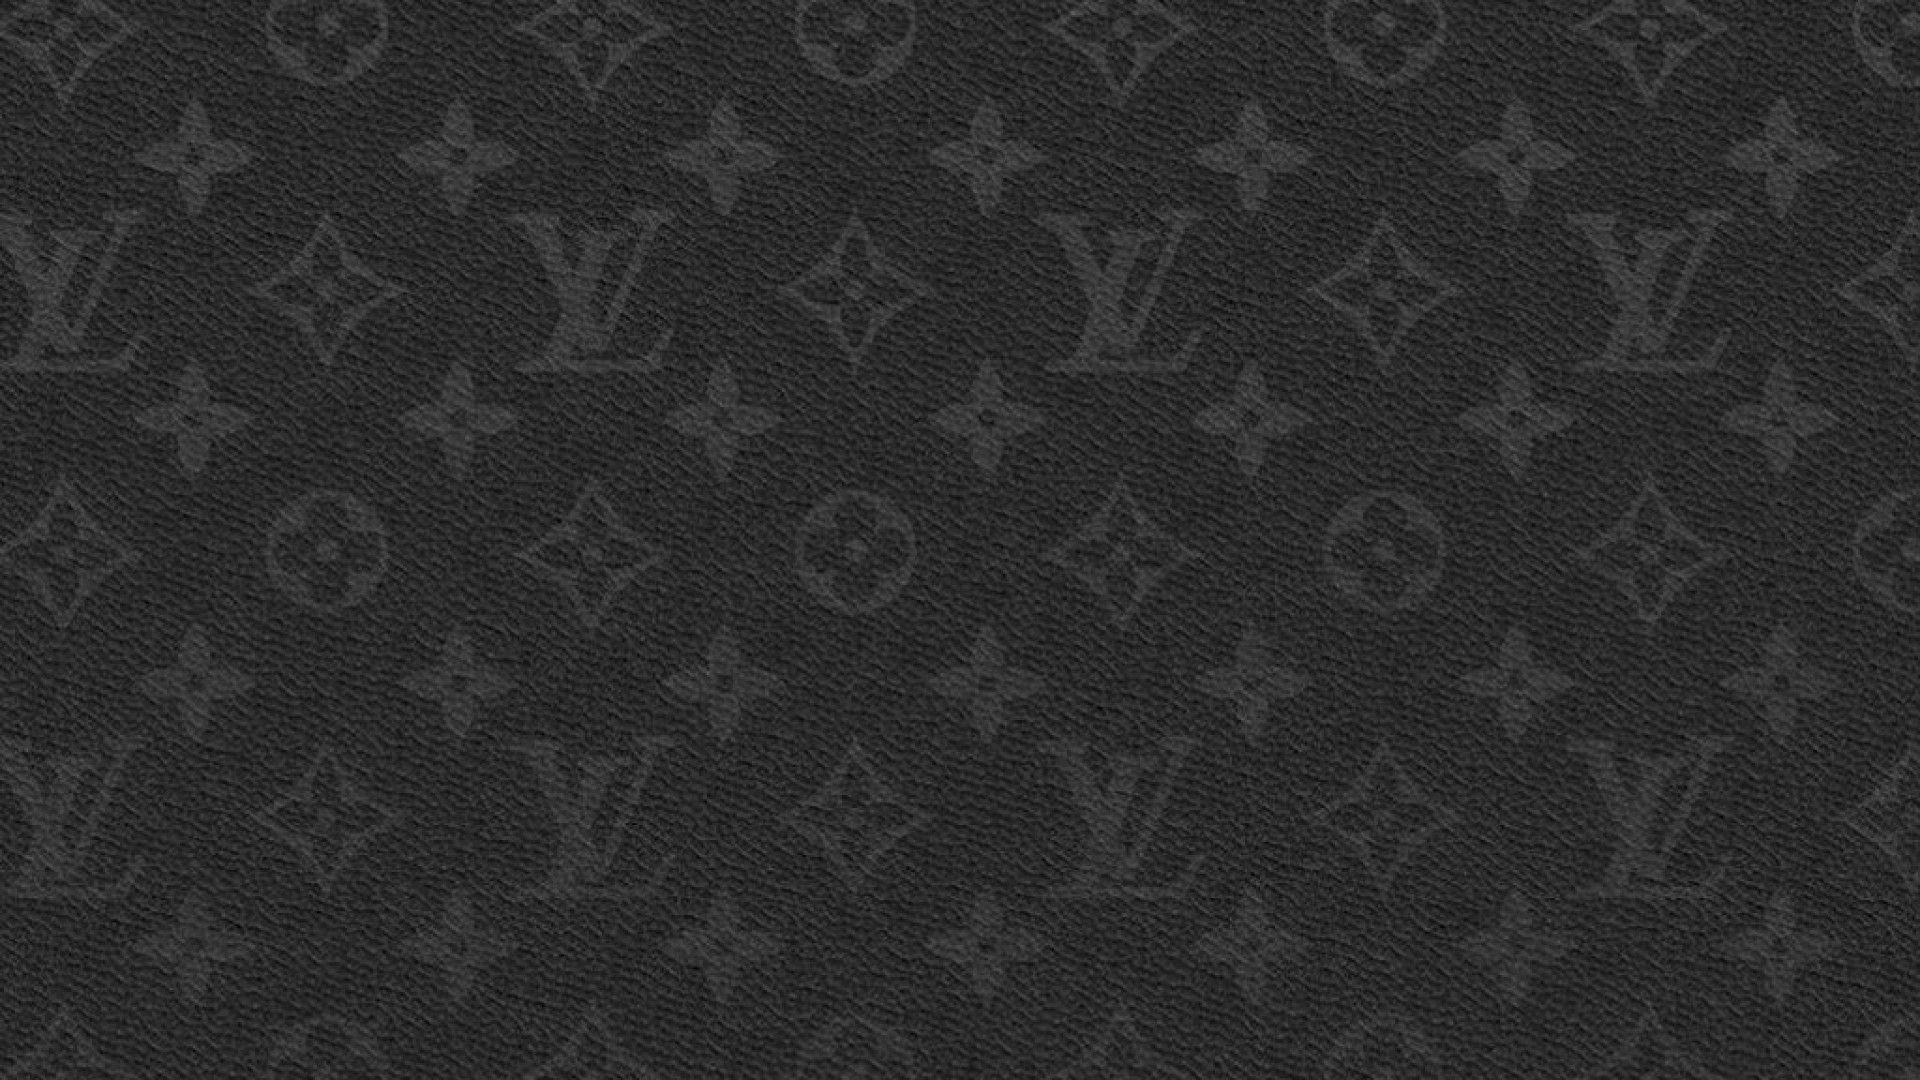 Louis Vuitton Wallpapers (81+ images inside)